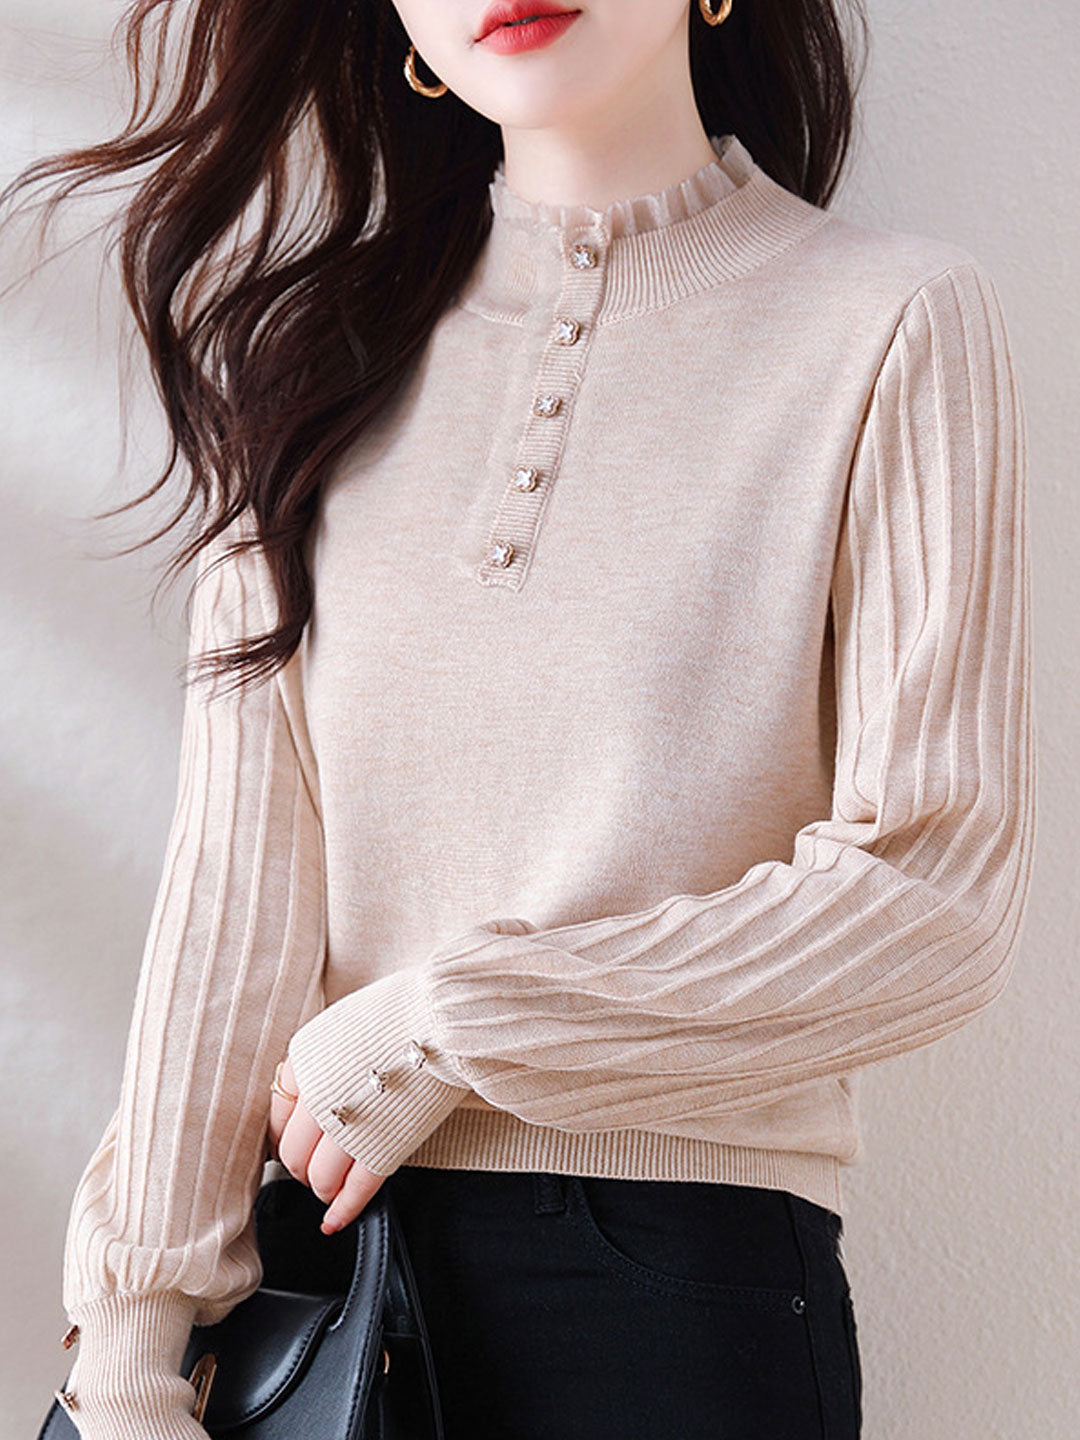 Hannah Retro Turtleneck Knitted Pullover Sweater